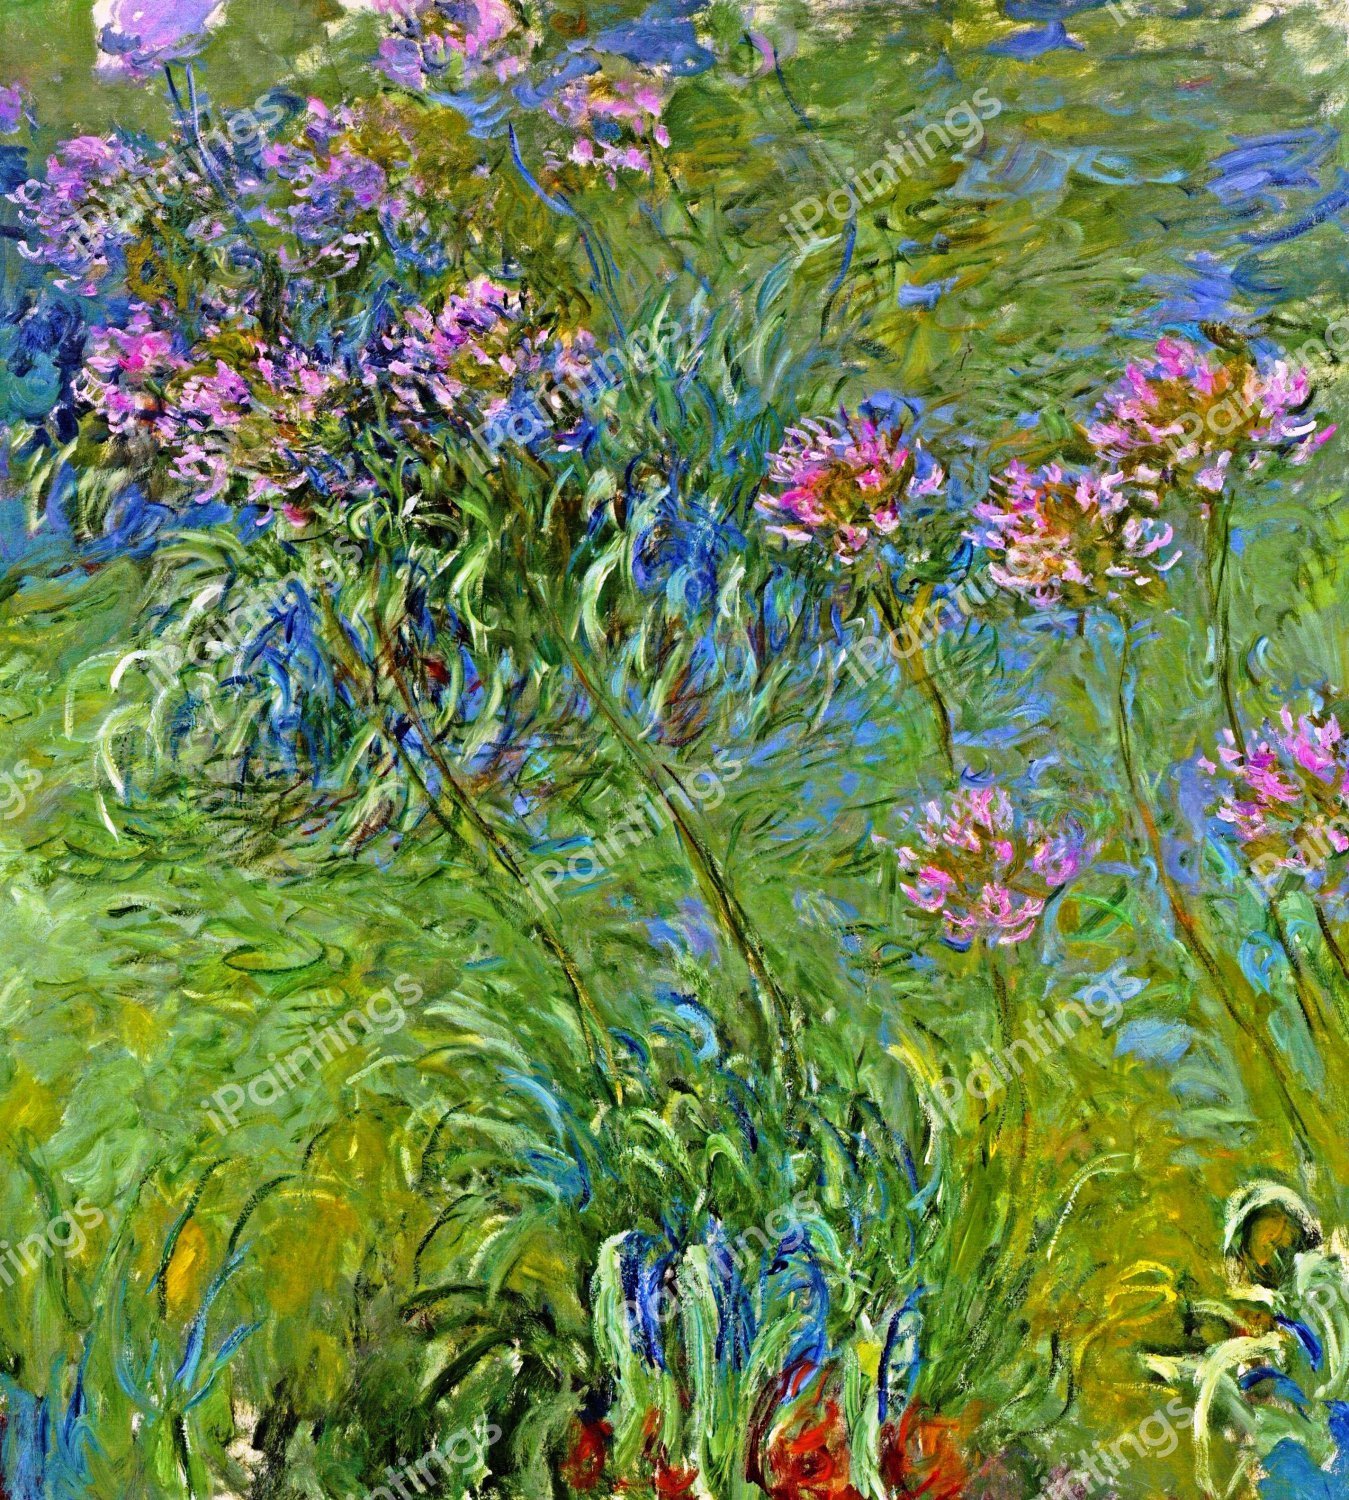 Agapanthus Flowers Painting by Claude Monet Reproduction | iPaintings.com